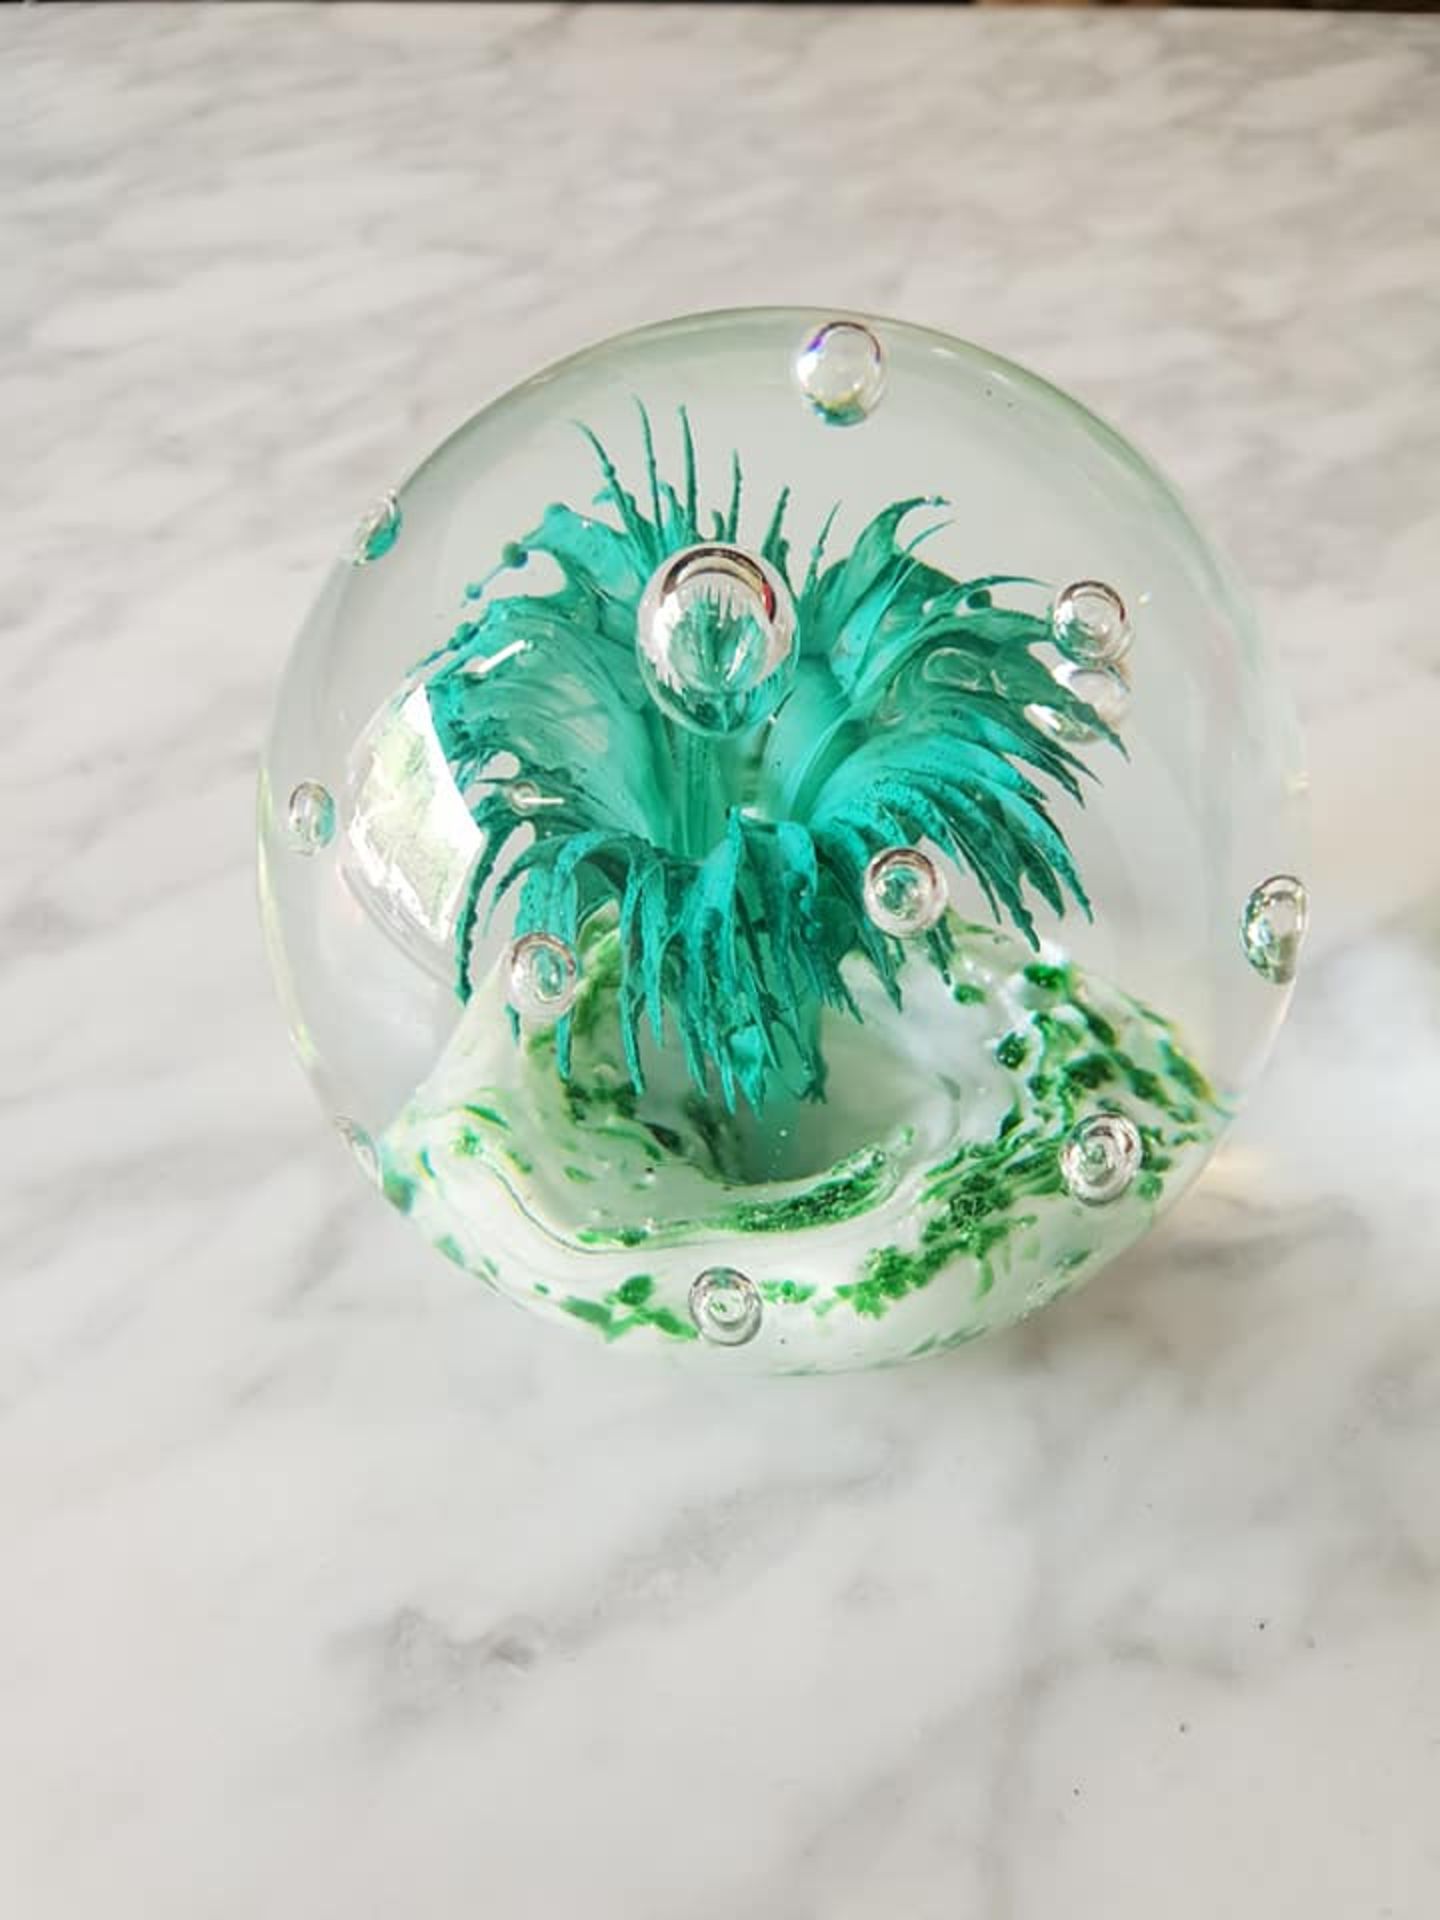 Bohemian blown art glass sphere paperweight 9cm palm tree green with controlled bubble design - Image 2 of 2